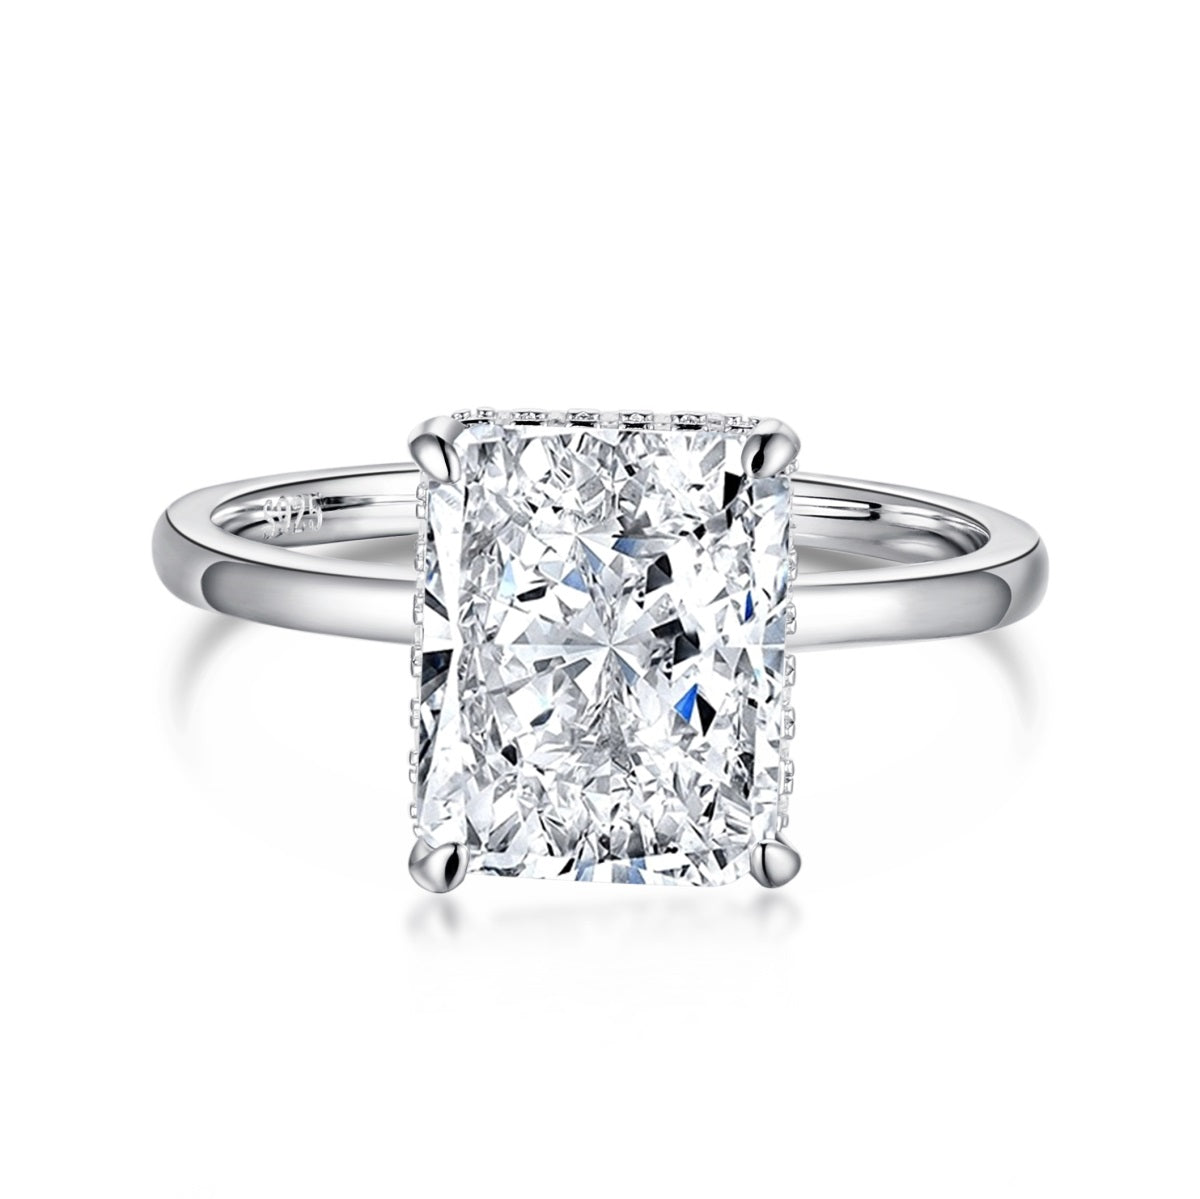 4.0ct Sterling Silver Radiant Cut ‘Ivy’ Solitaire Ring (Limited Edition)